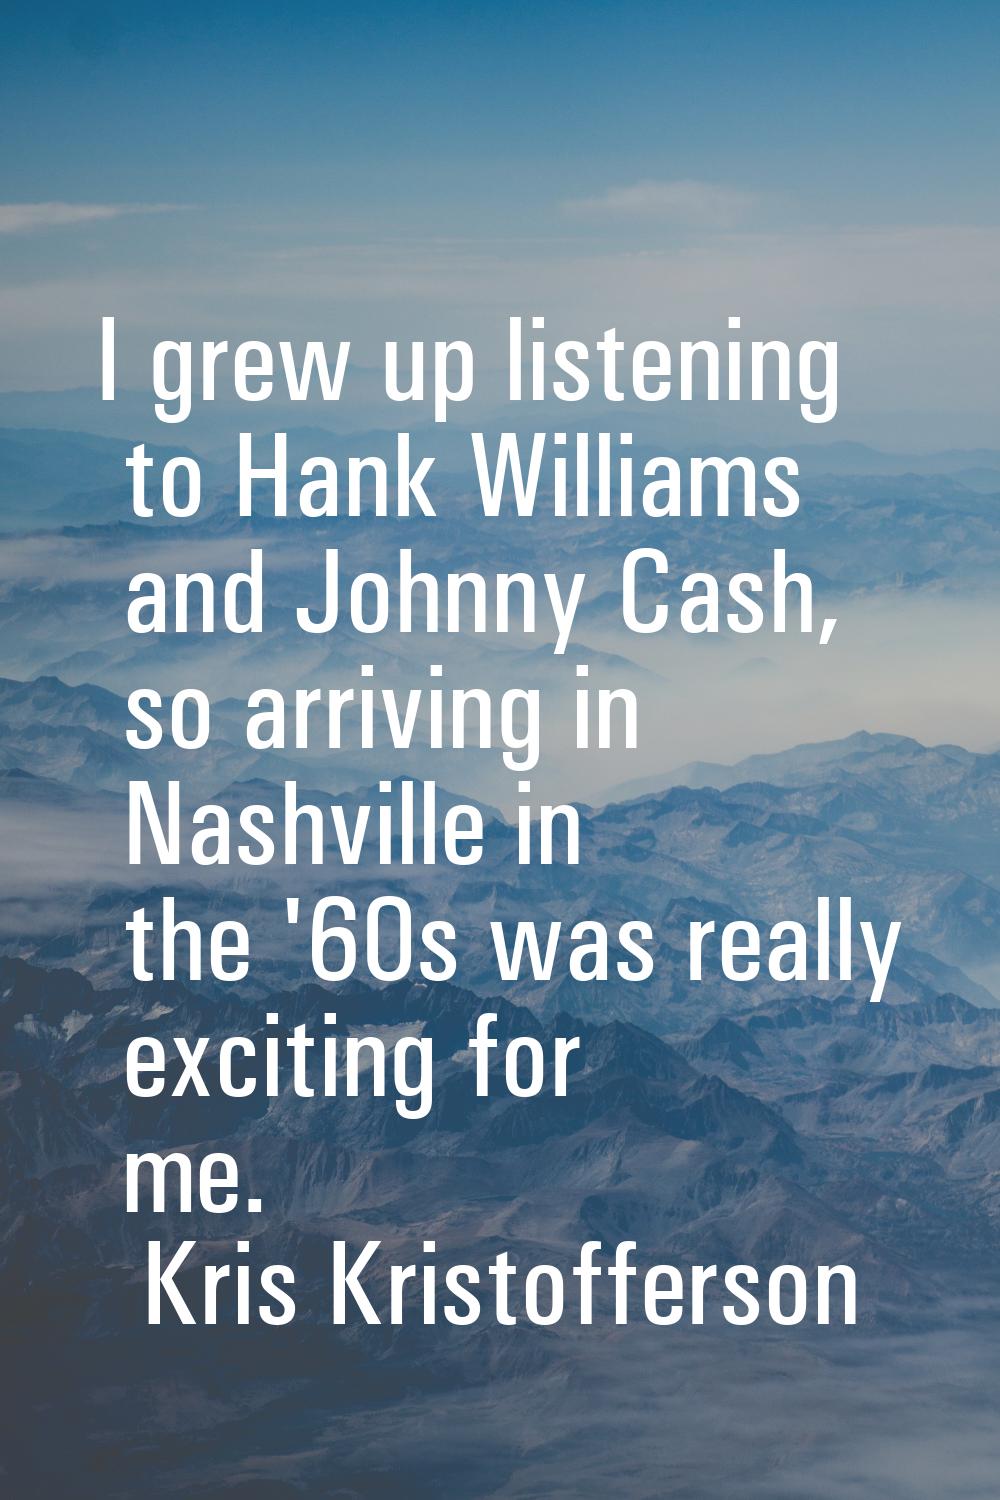 I grew up listening to Hank Williams and Johnny Cash, so arriving in Nashville in the '60s was real